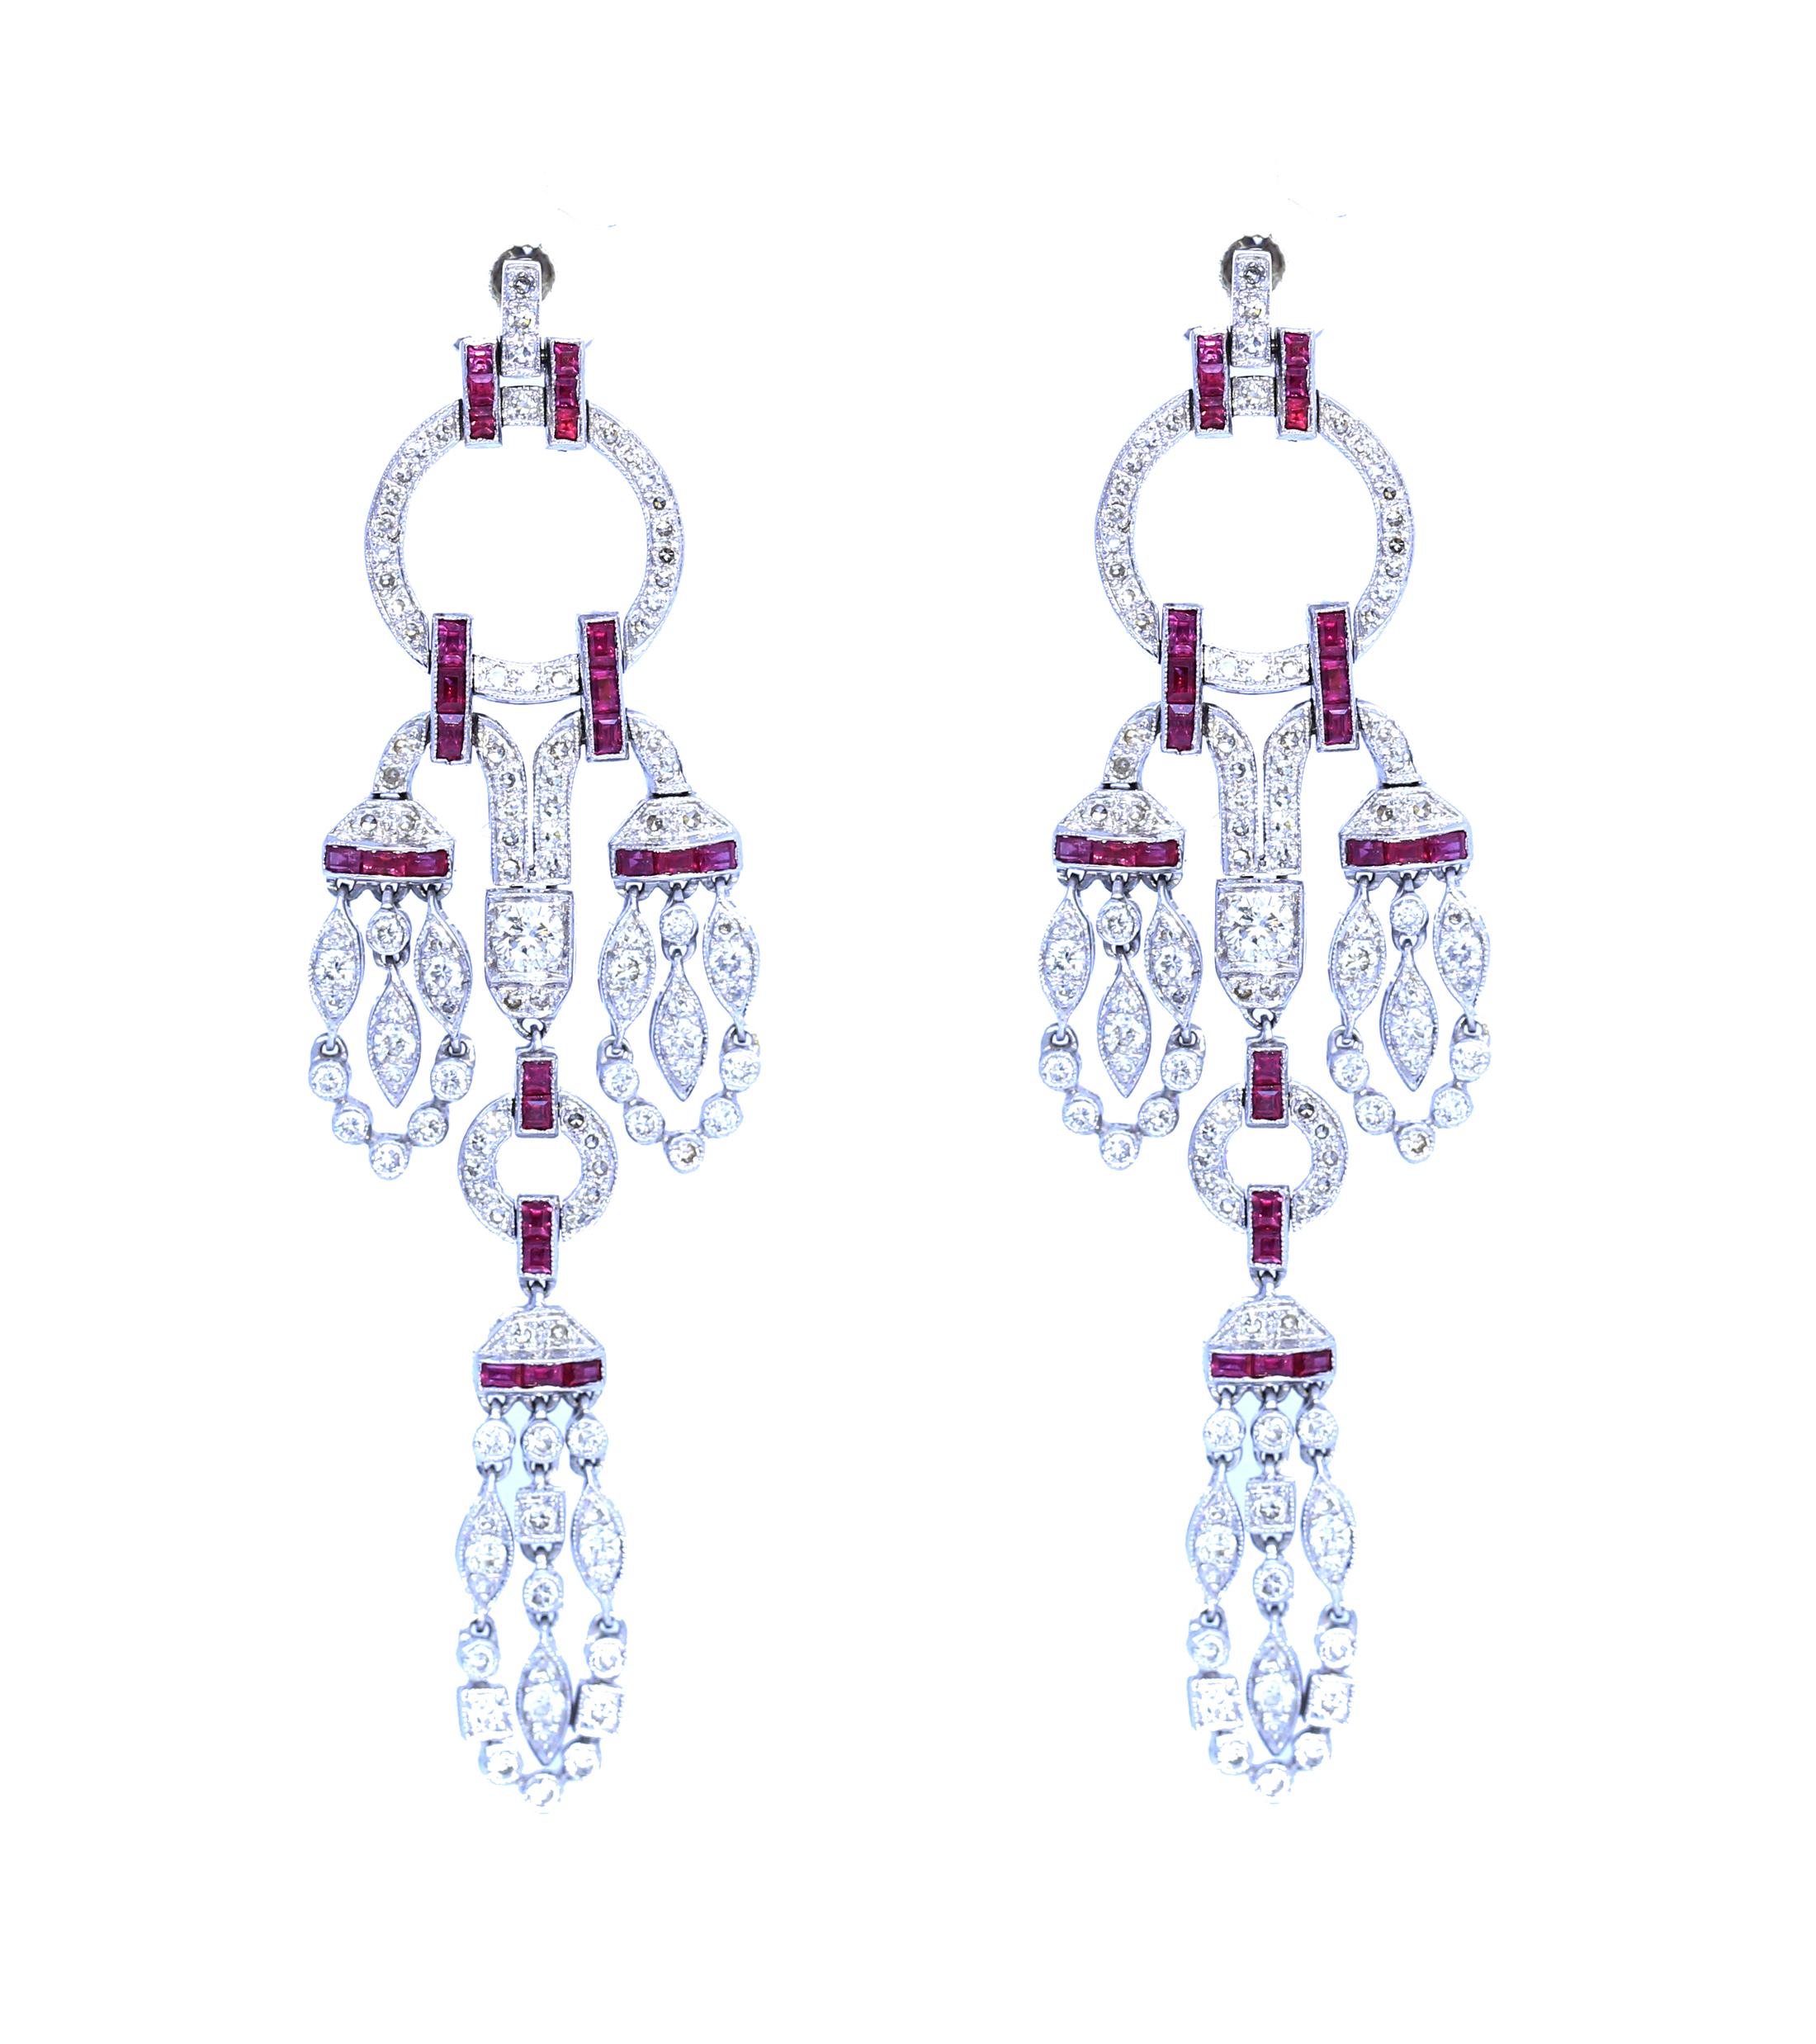 Chandelier Earrings with Diamonds and Rubies.
Containing 178 round brilliant and single cut diamonds weighing approximately 1.88Ct total and 50 baguette-cut rubies.
Freely moving parts ensure that the earring sits perfectly on the ear. Delicate and